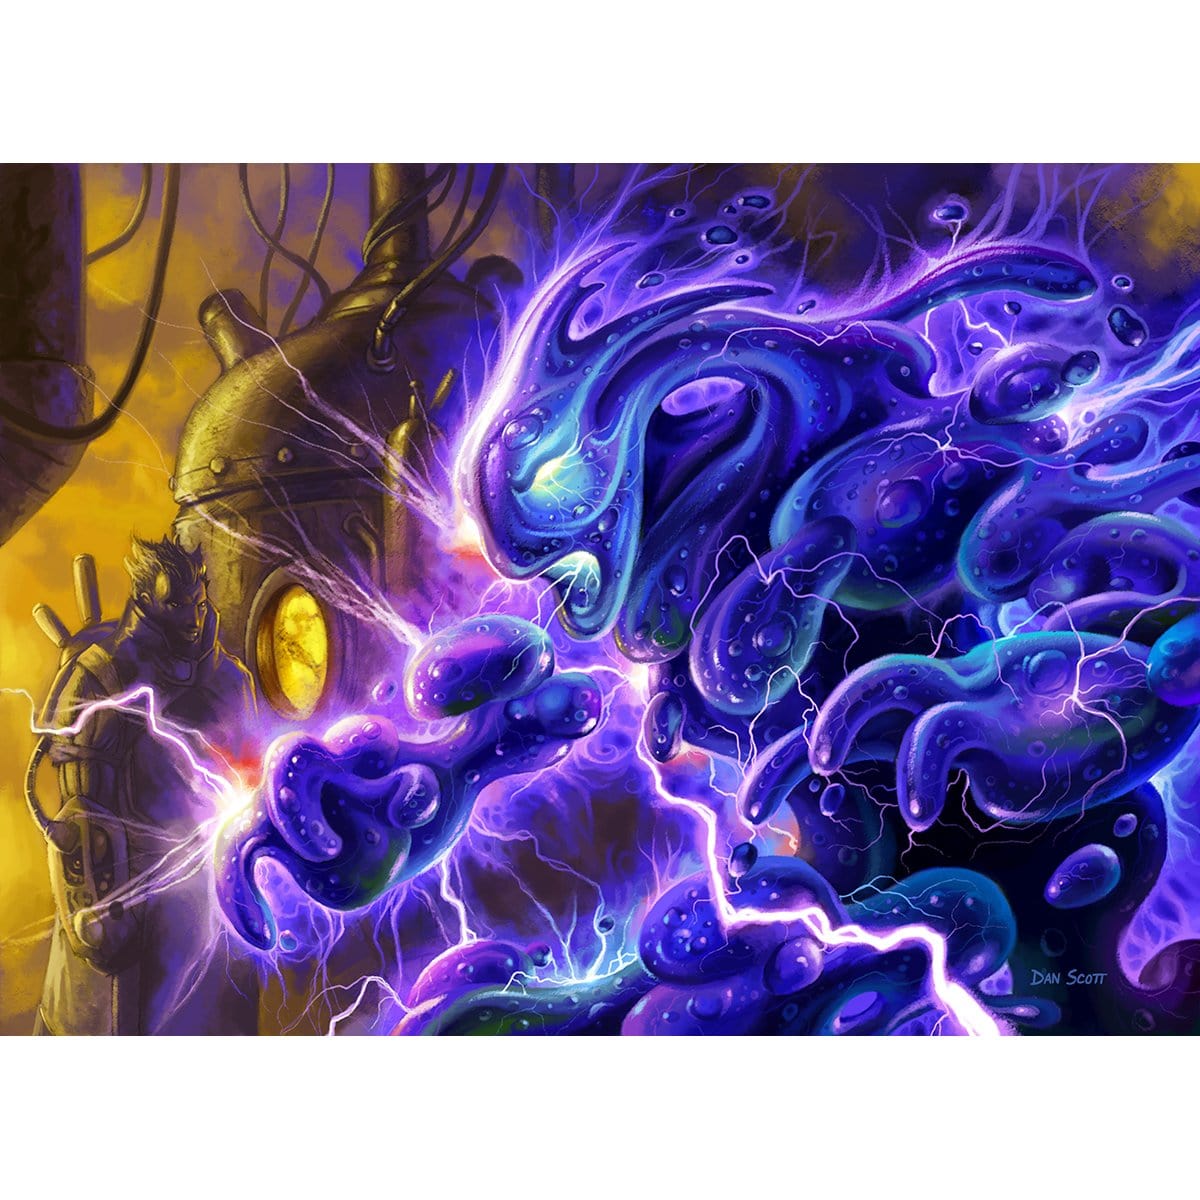 Gelectrode Print - Print - Original Magic Art - Accessories for Magic the Gathering and other card games